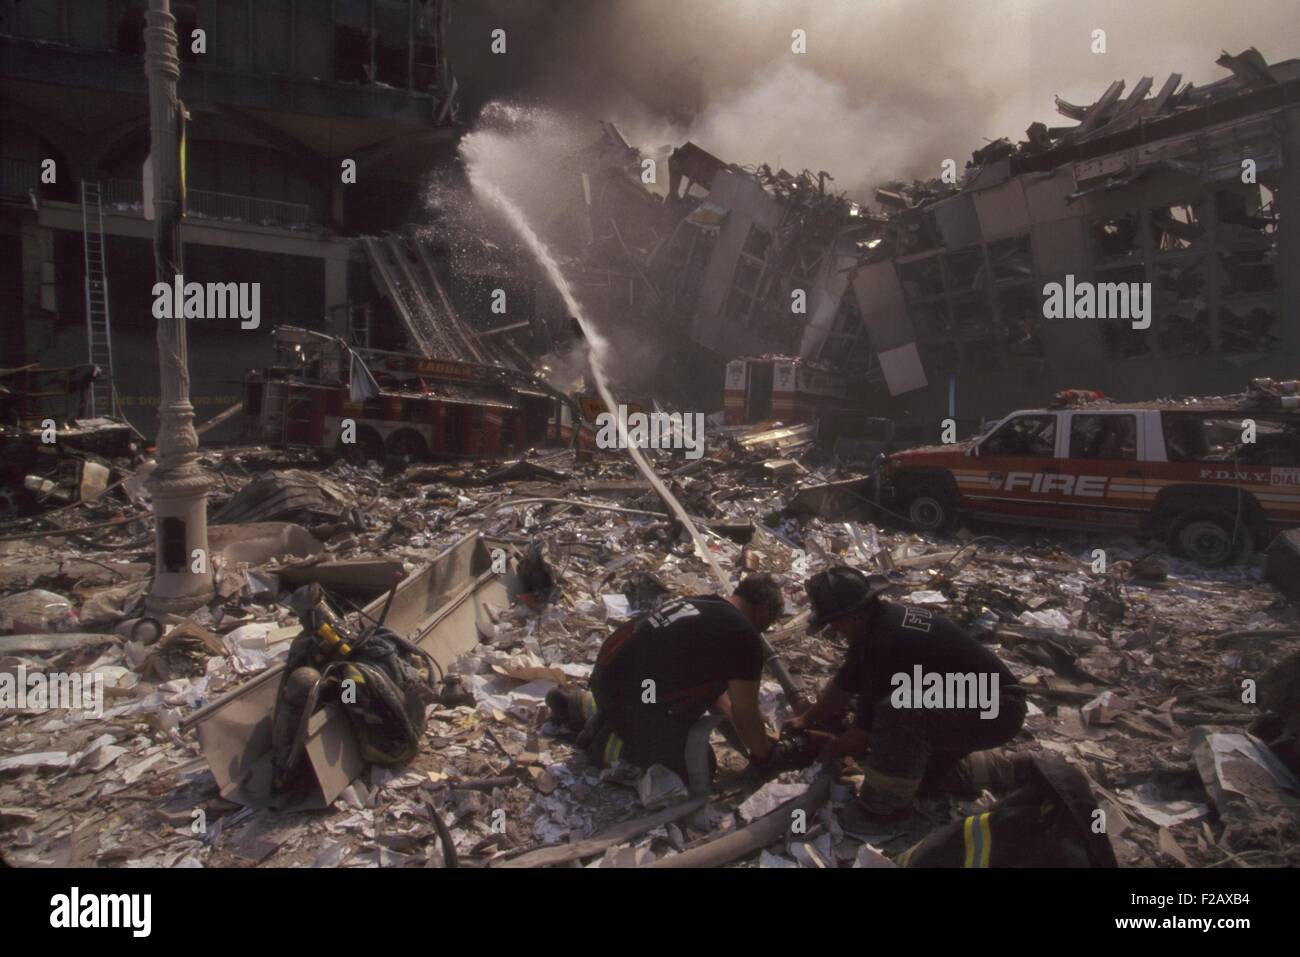 Fire fighters set up a hose amid smoking rubble following September 11th terrorist attack on World Trade Center. At left is still standing WTC 6. At right is the destroyed North pedestrian bridge over West Side Highway (West St.). The water stream is toward the burning pile of the collapsed WTC1 (North Tower). New York City, Sept. 11, 2001. (BSLOC 2015 2 48) Stock Photo